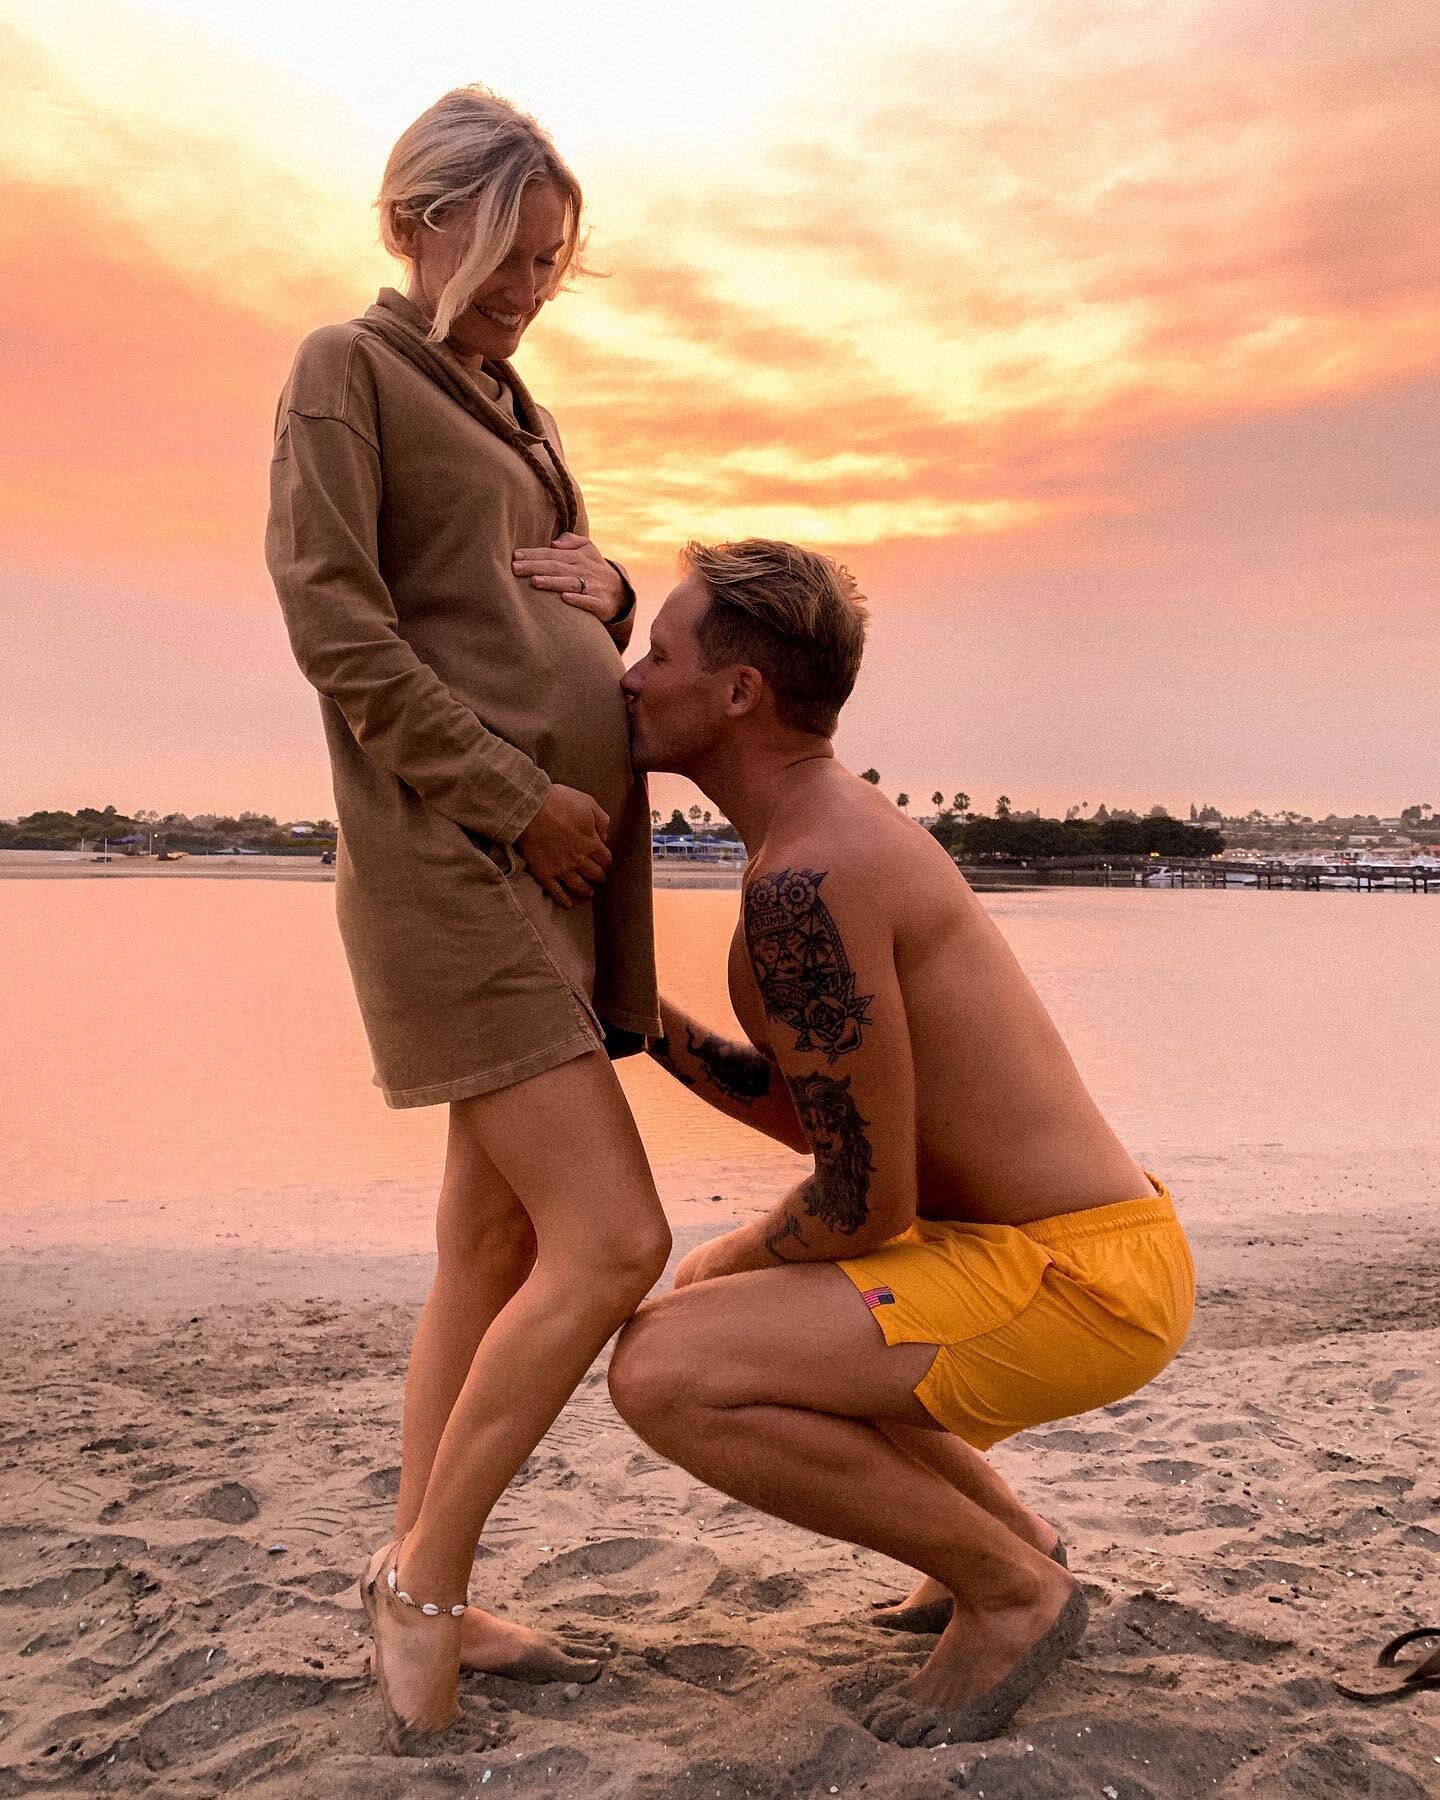 23 WEEKS!!! 👶🏼 We found out we were pregnant right at 4 weeks, so we&rsquo;ve officially been celebrating this little life for 19 weeks already!
.
So insane... last year in the span of 19 weeks we visited like 16 countries 🤣 not in 2020 though!! B